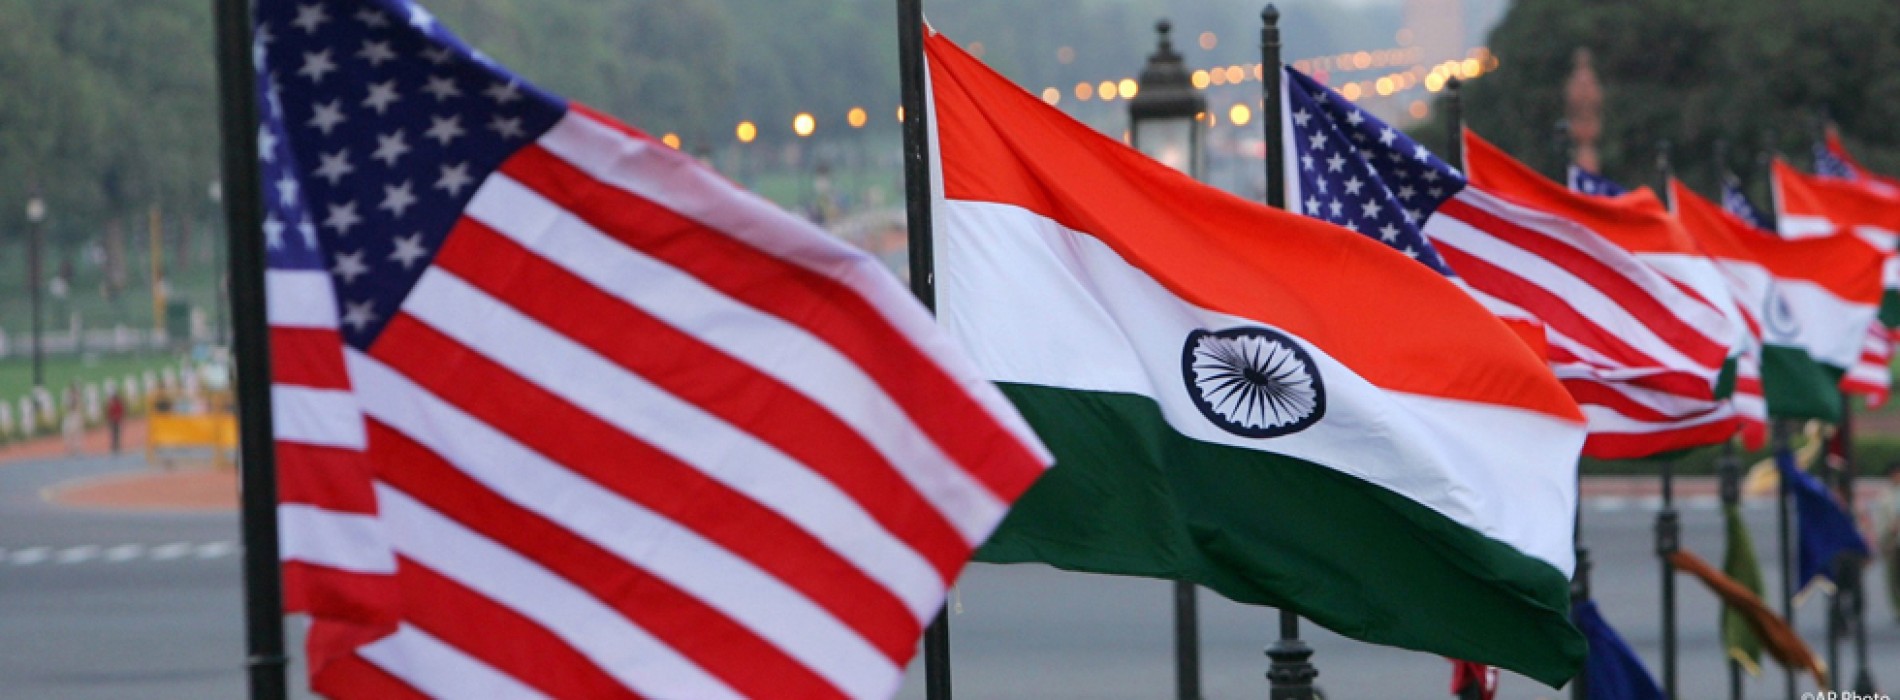 Indian visitors in US spent a record $13.6 billion in 2016 says Report